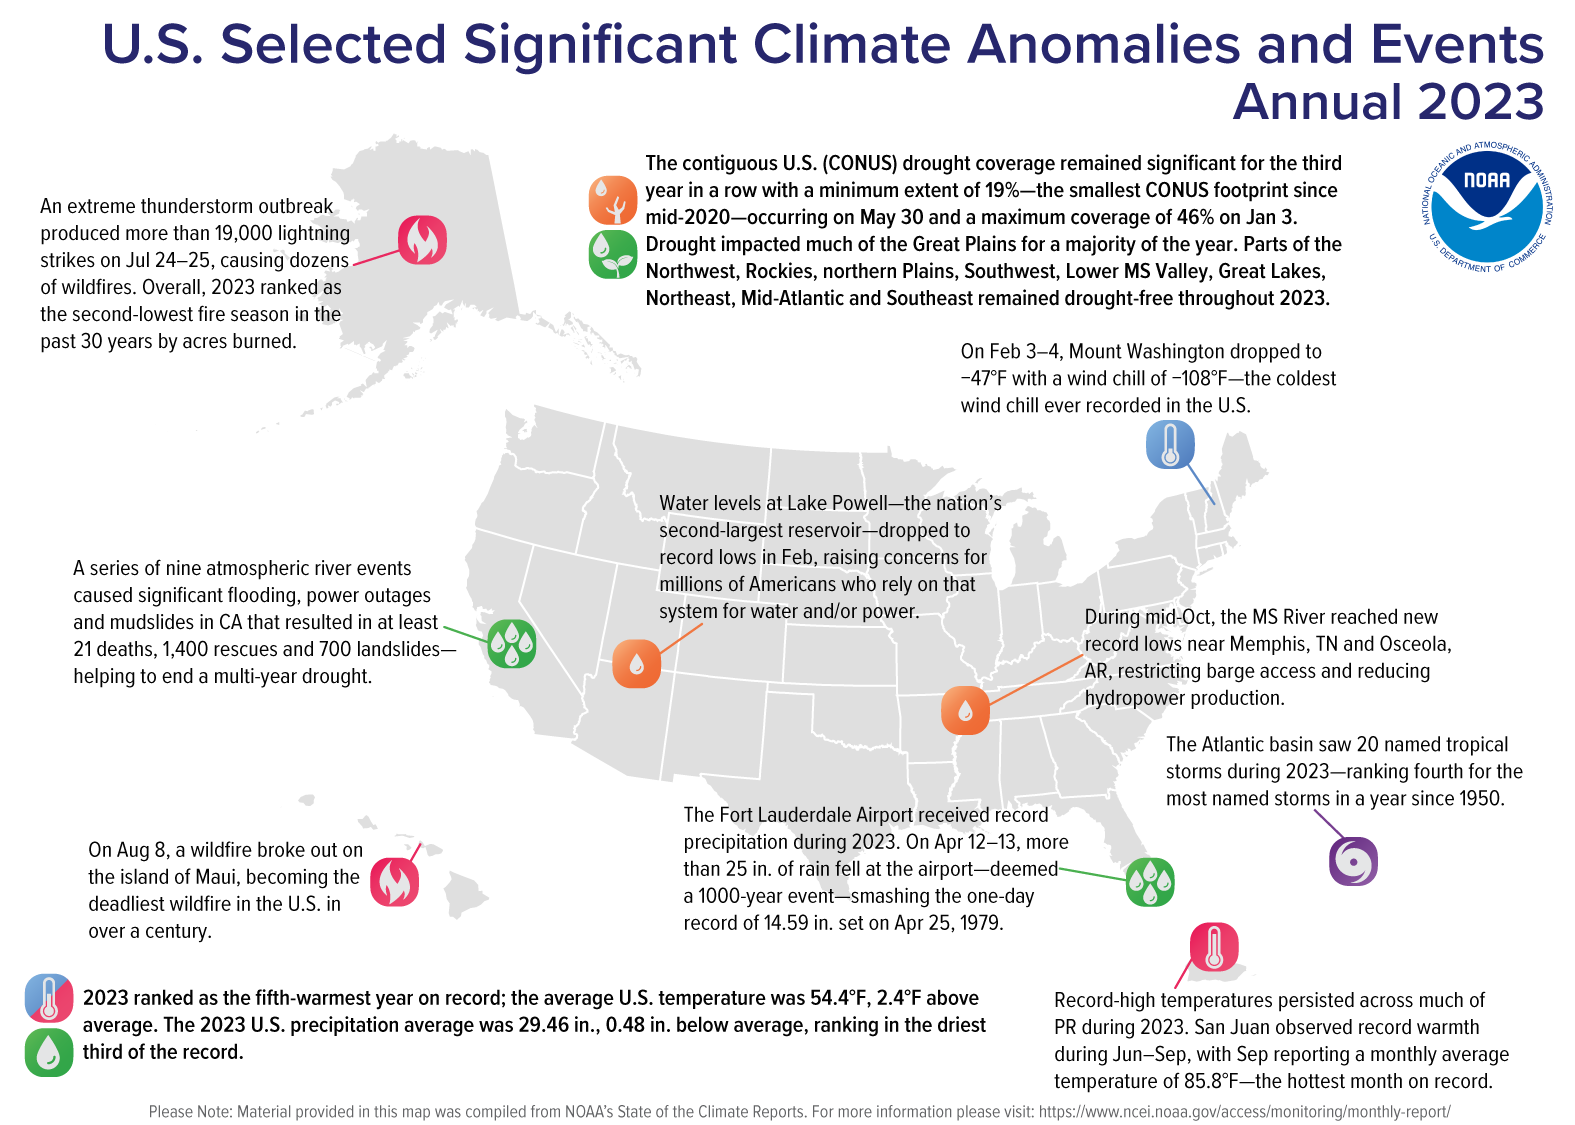  A map of the U.S. plotted with significant climate events that occurred during 2023. Please see the story below as well as more details in the report summary from NOAA NCEI at http://bit.ly/USClimate202312.  